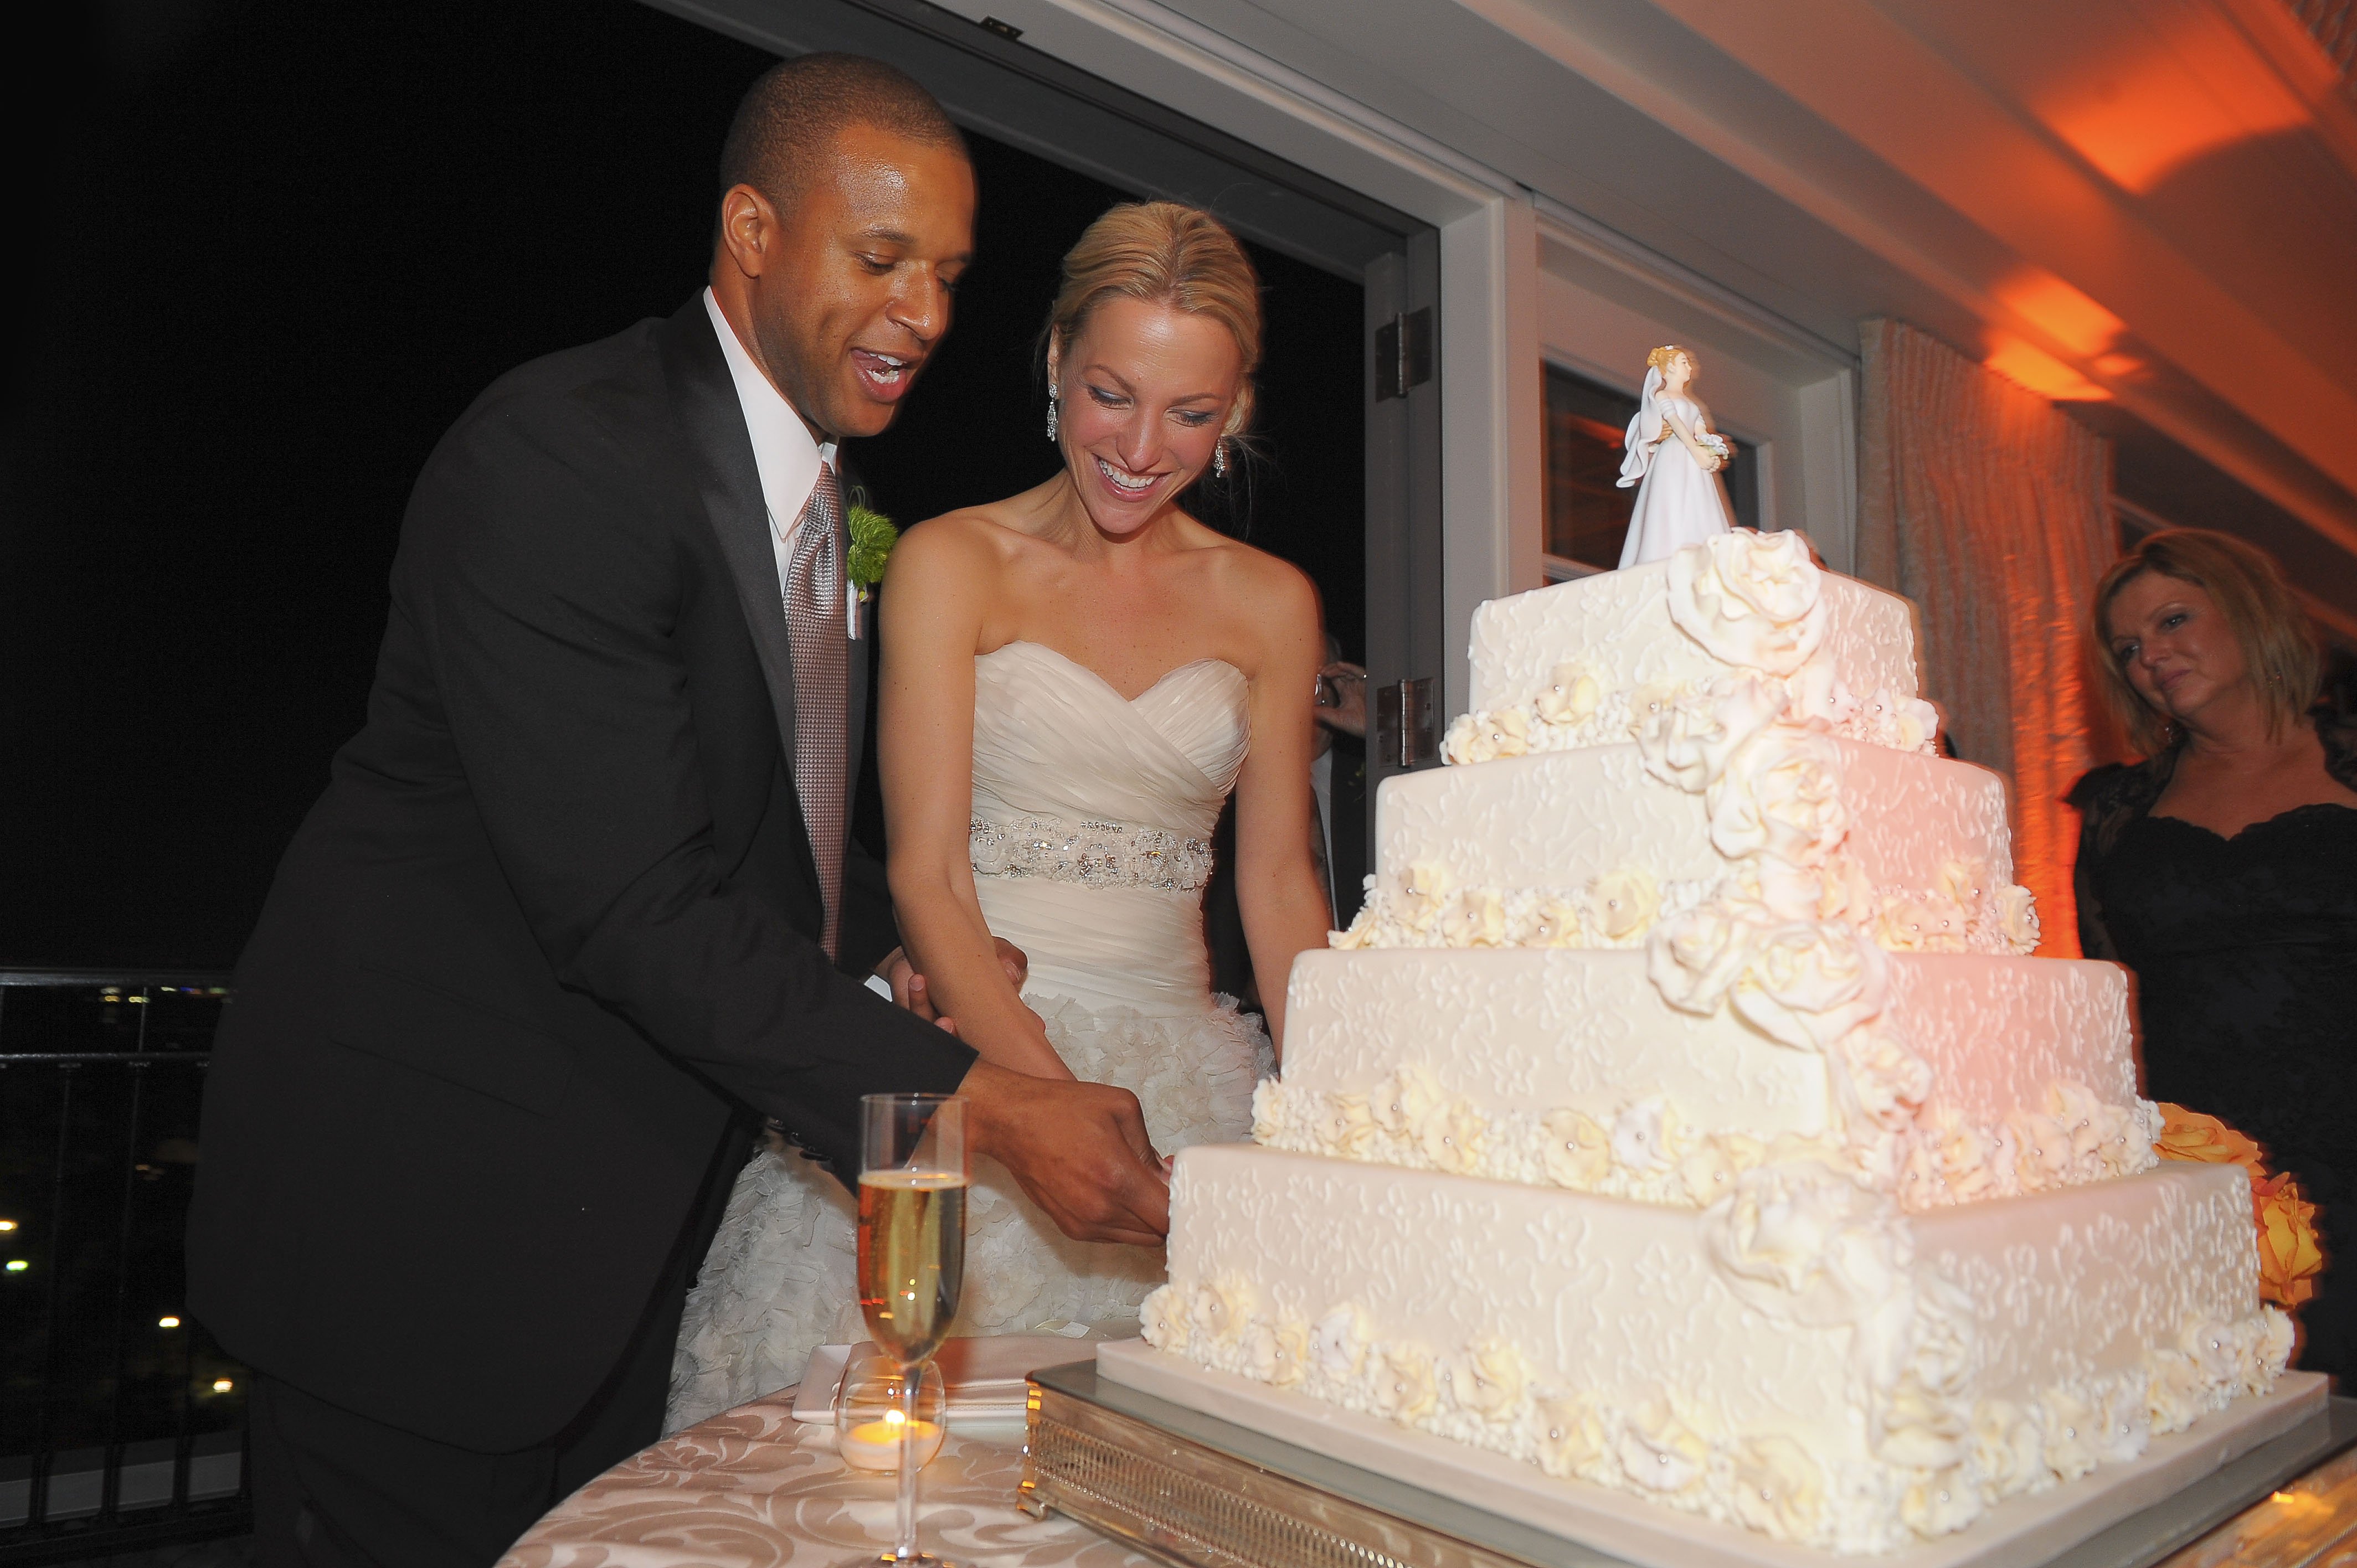 Craig Melvin and Lindsay Czarniak on their wedding day in Washington D.C 2011. | Source: Getty Images